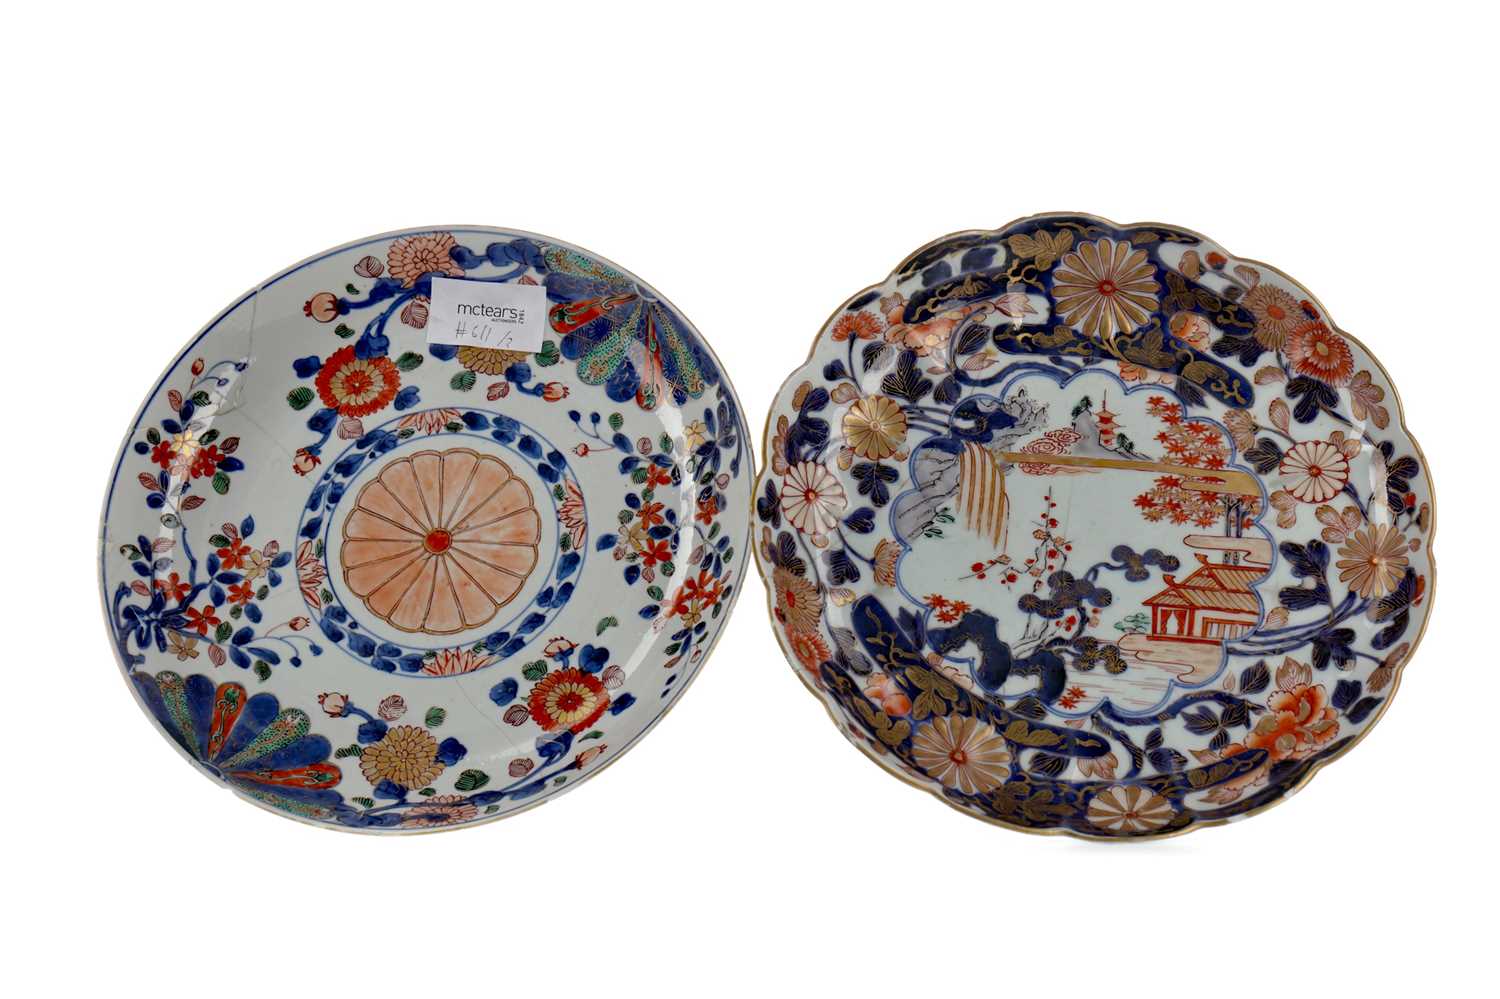 Lot 74 - AN 19TH CENTURY JAPANESE IMARI PLATE AND ANOTHER